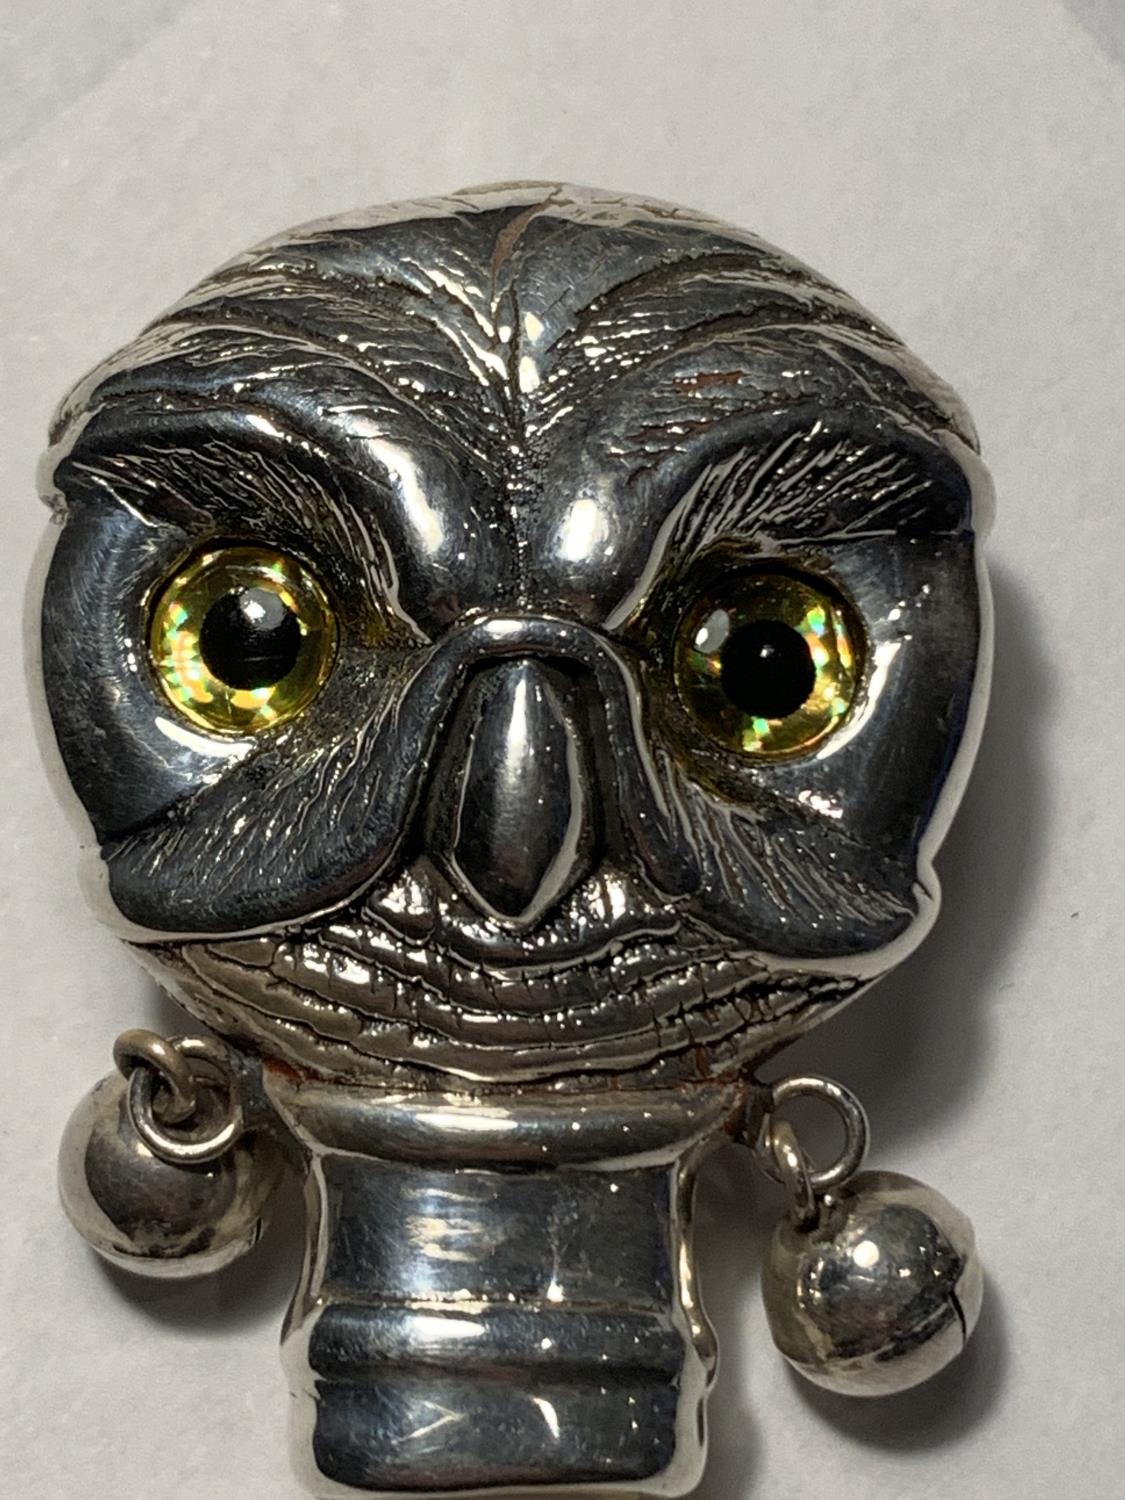 A SILVER AND MOTHER OF PEARL OWL BABY RATTLE - Image 3 of 3